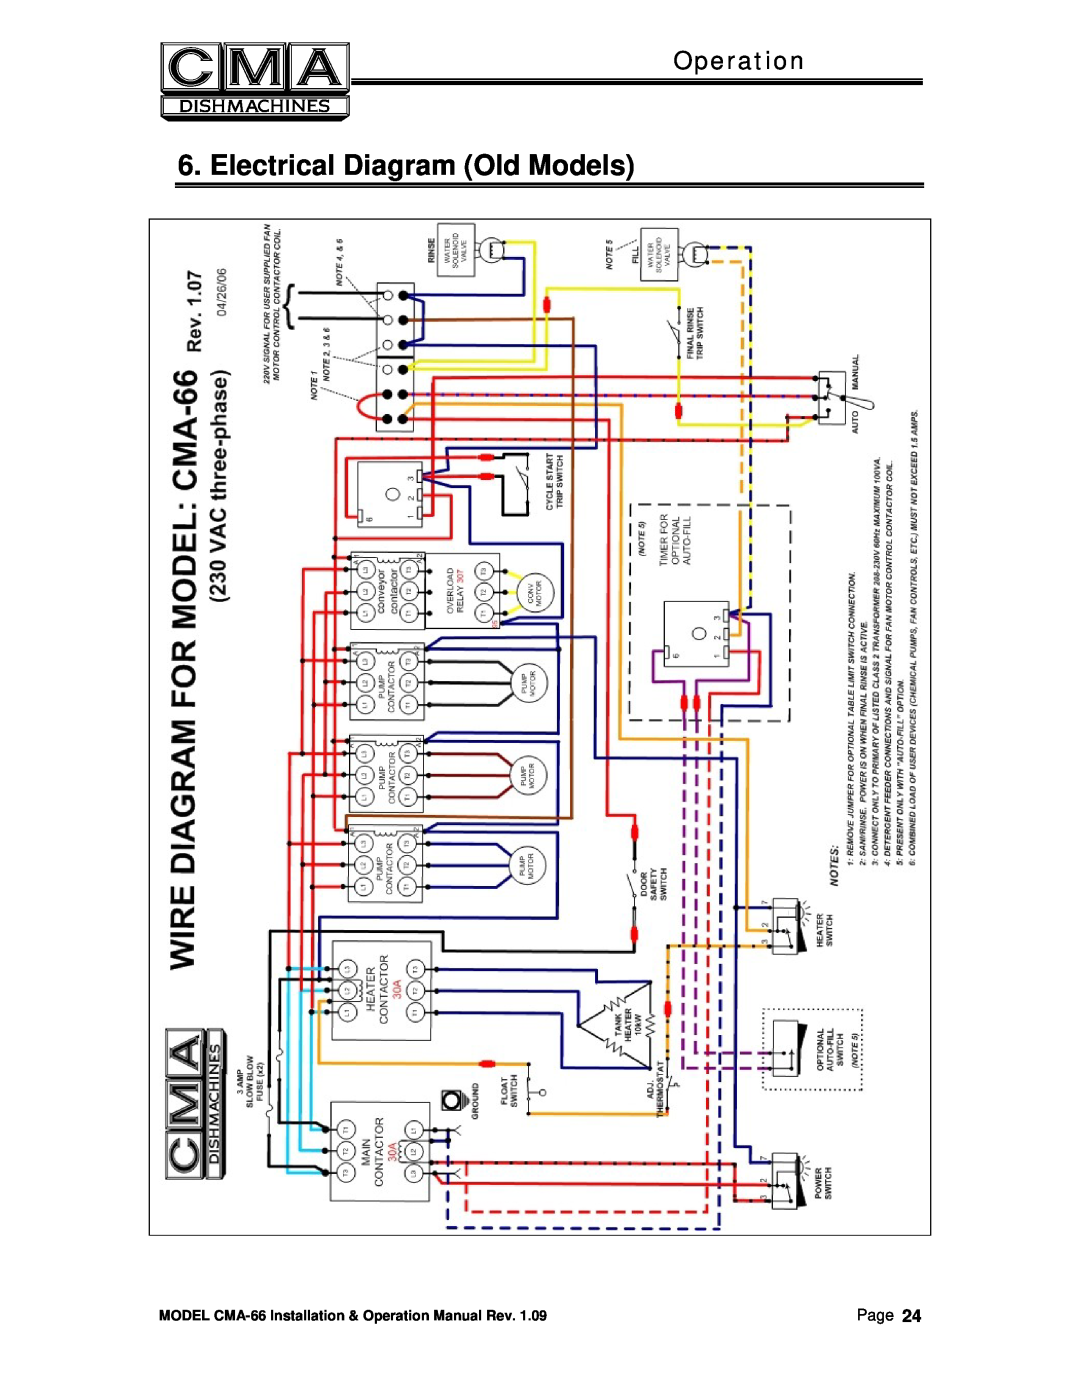 CMA Dishmachines CMA-66 manual Electrical Diagram Old Models, Operation 